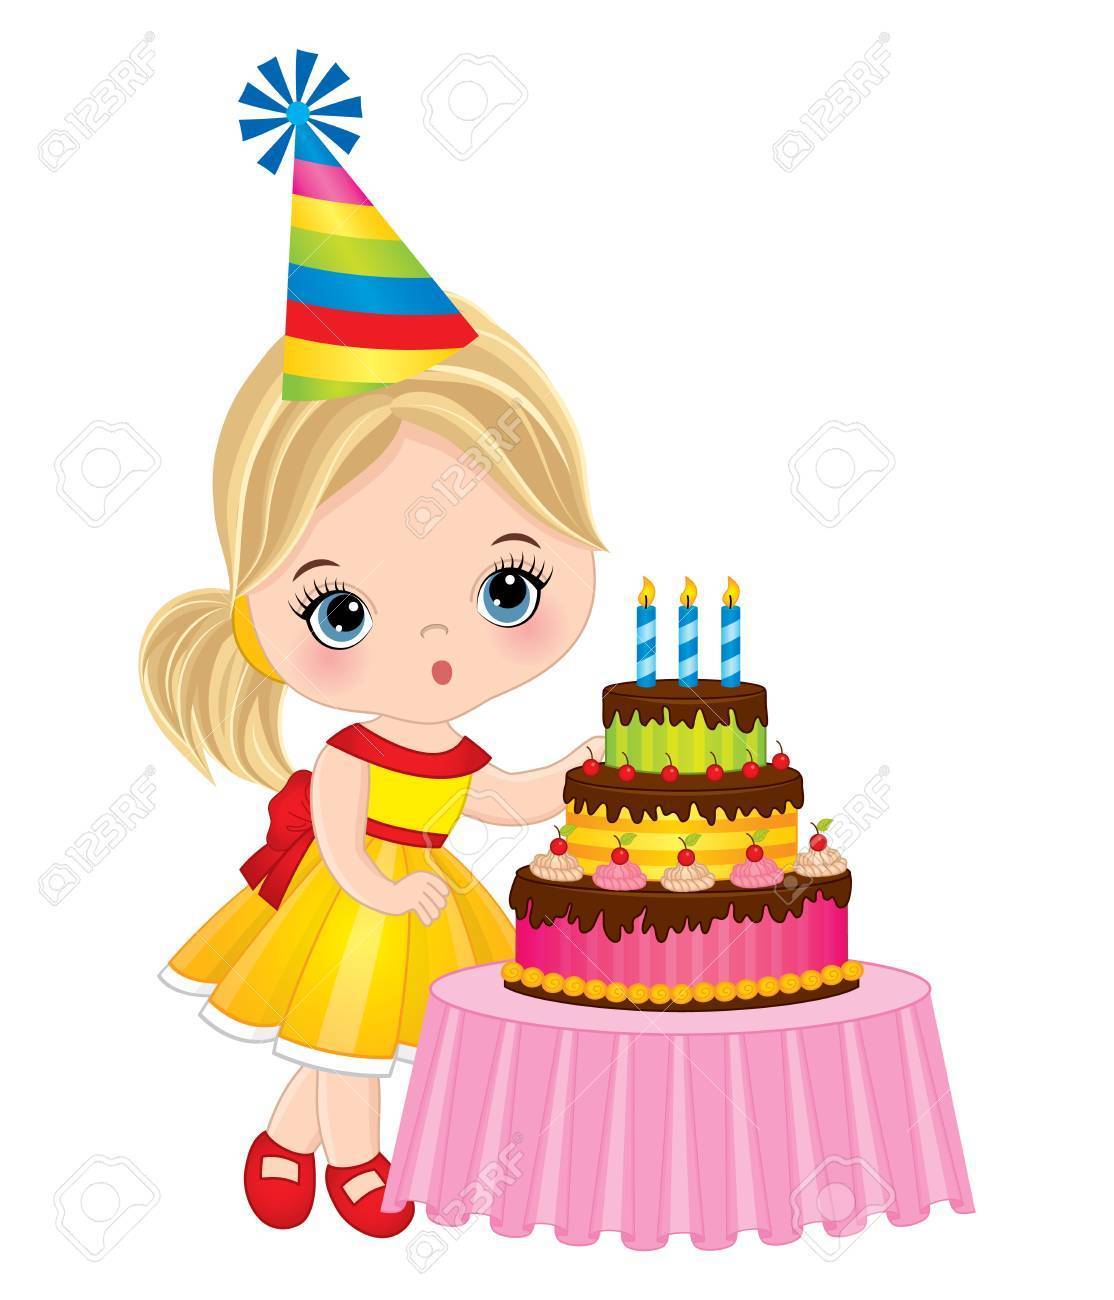 Girl with birthday cake clipart 5 » Clipart Portal.